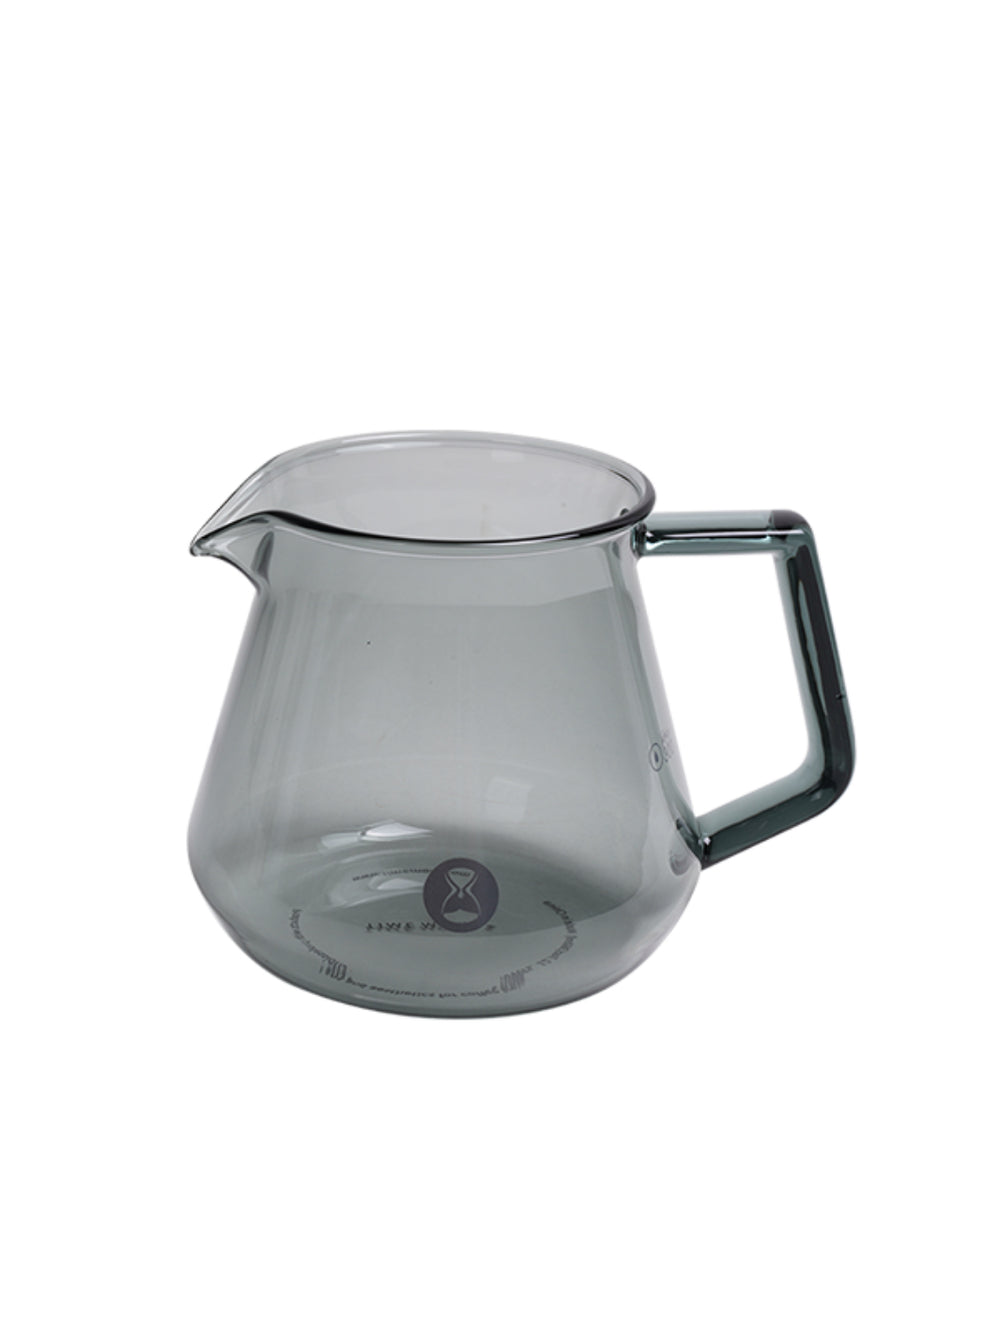 Timemore NANO 3 Carrying Case Pour Over Kit